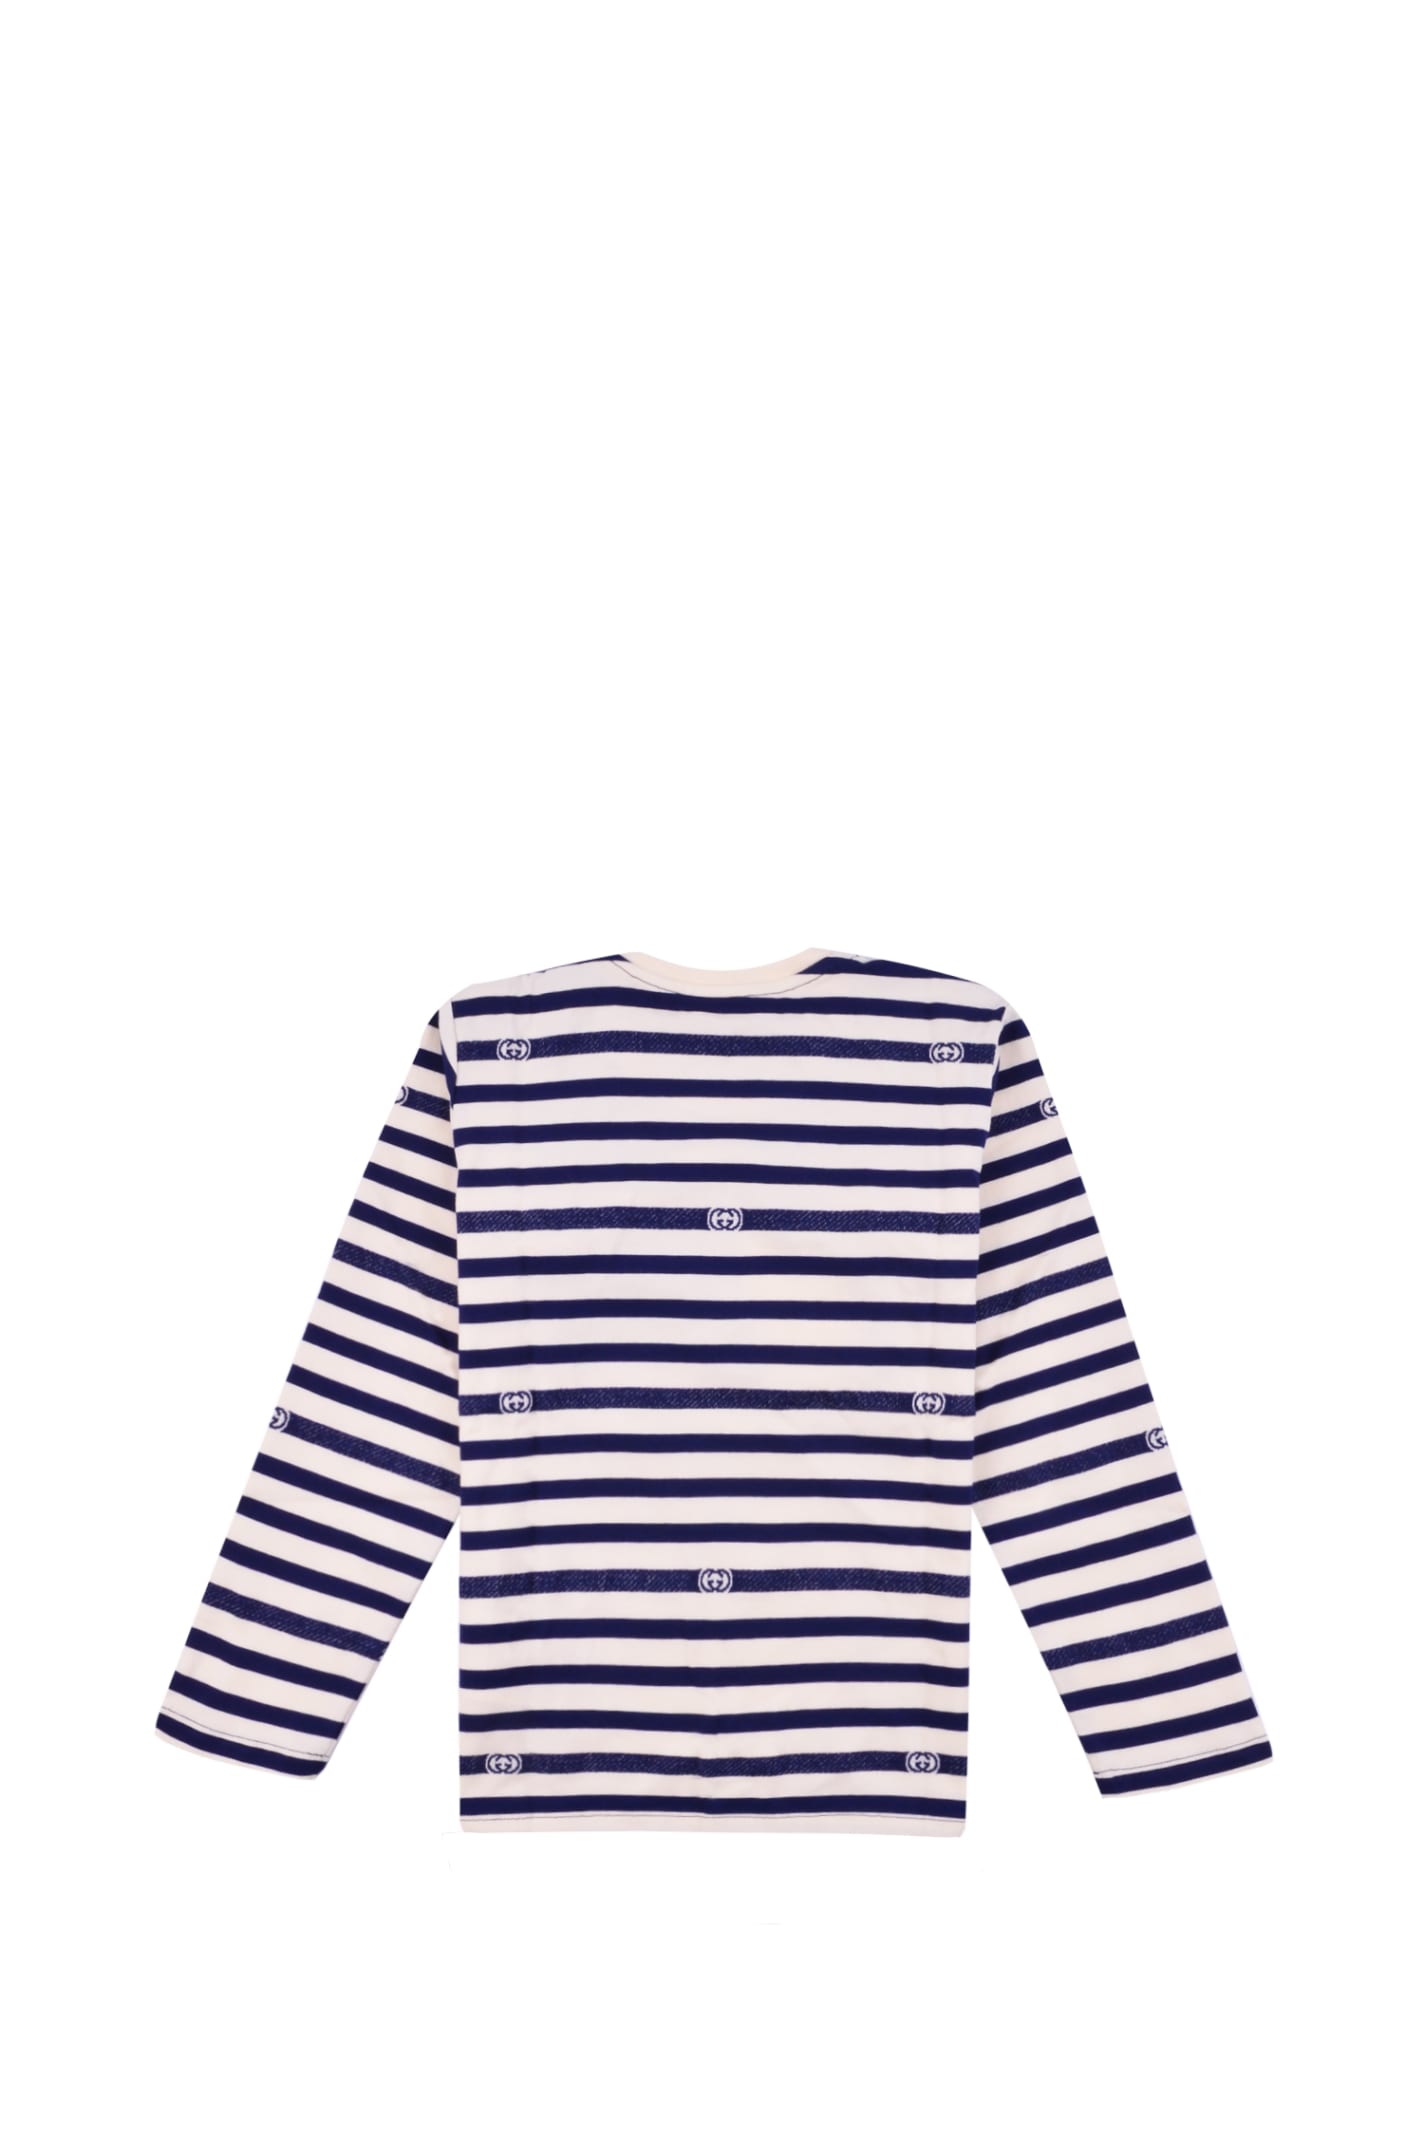 Shop Gucci Striped Cotton Jersey T-shirt In Blue